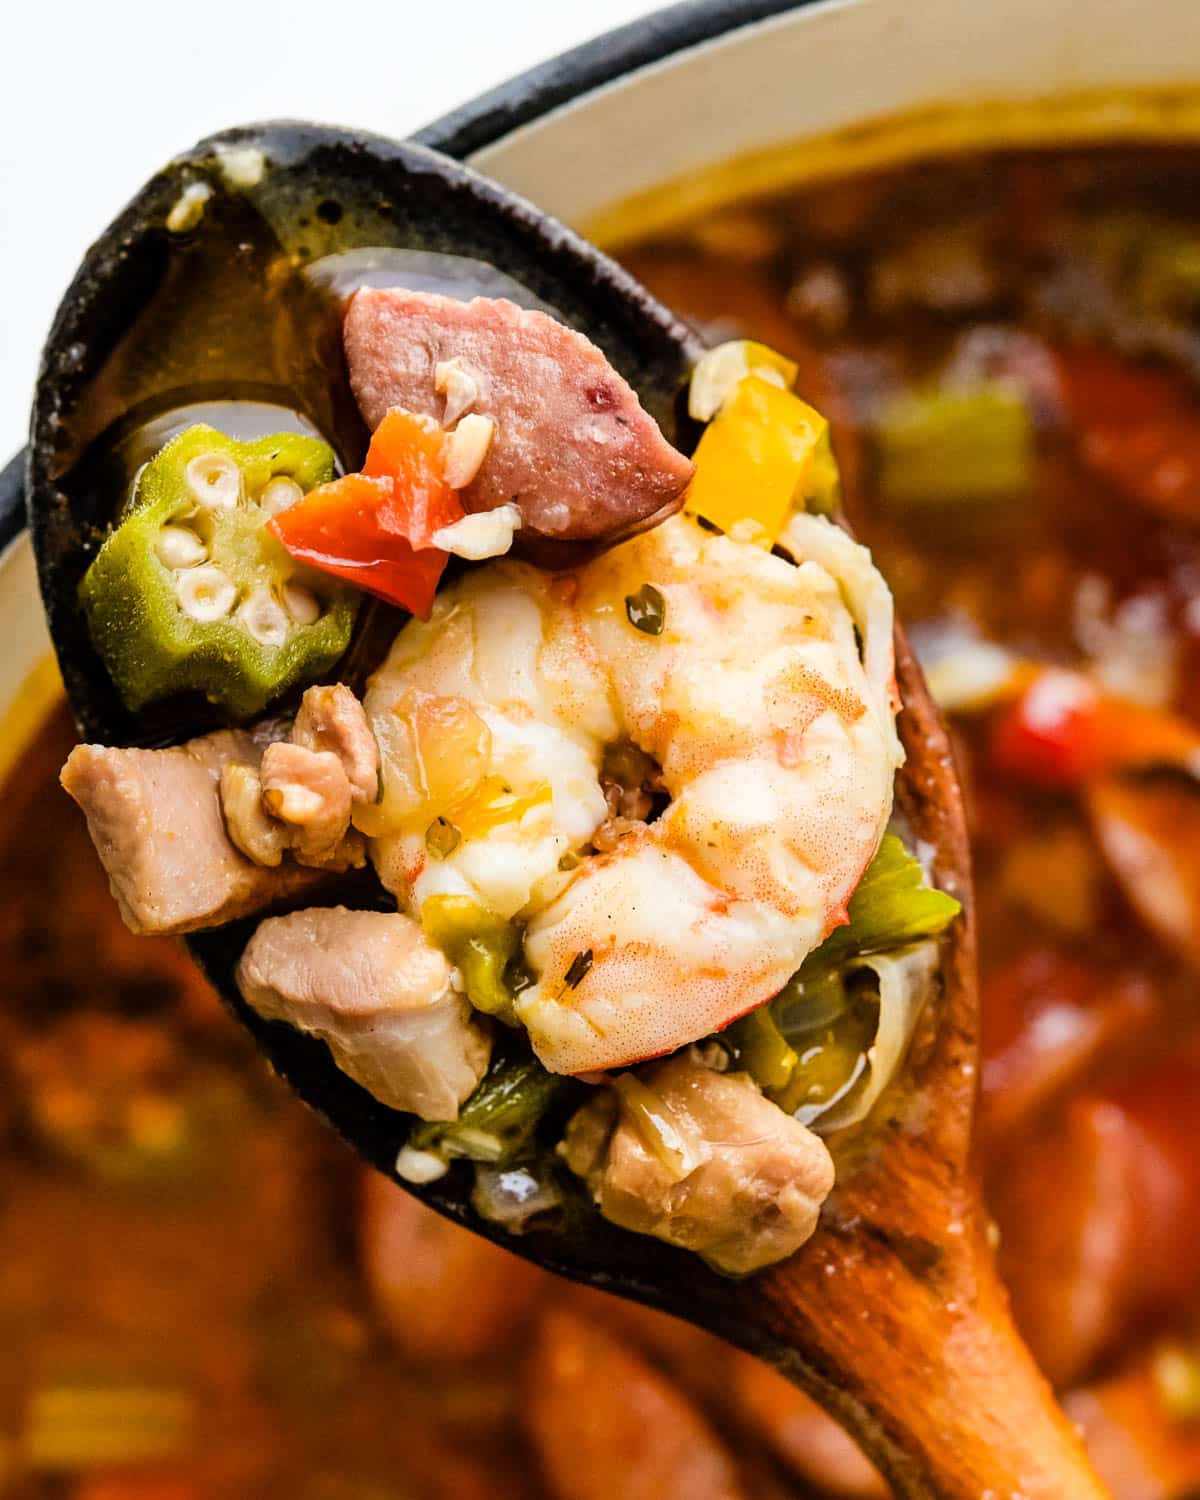 A pot of gumbo with chicken, sausage and seafood.